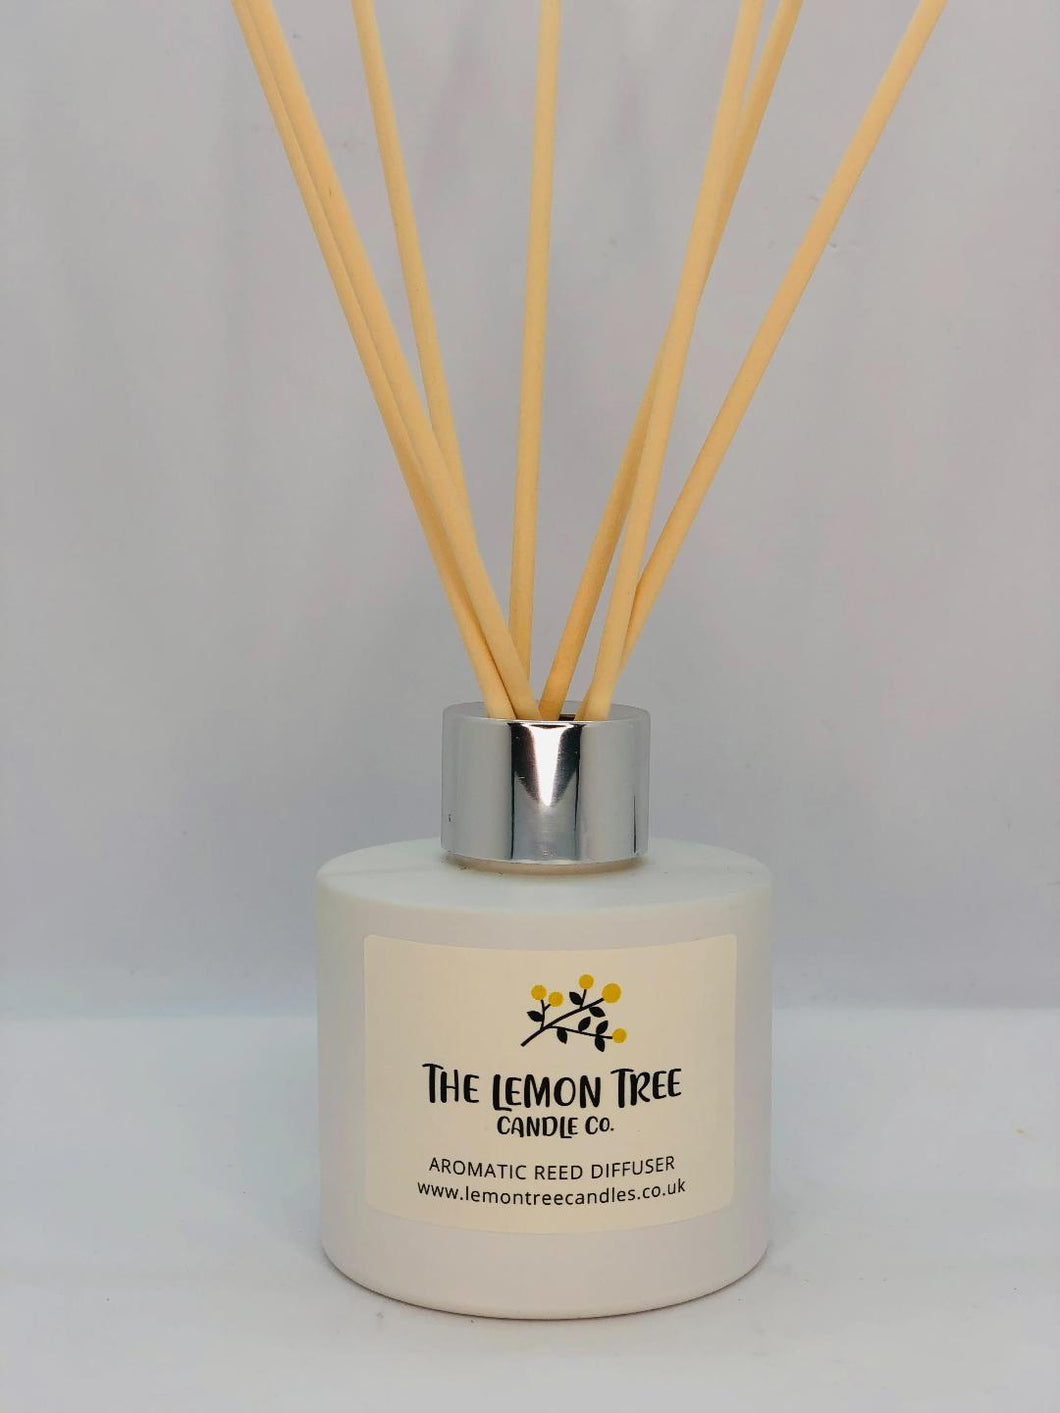 Black Orchid White Glass Diffuser - The Lemon Tree Candle Company